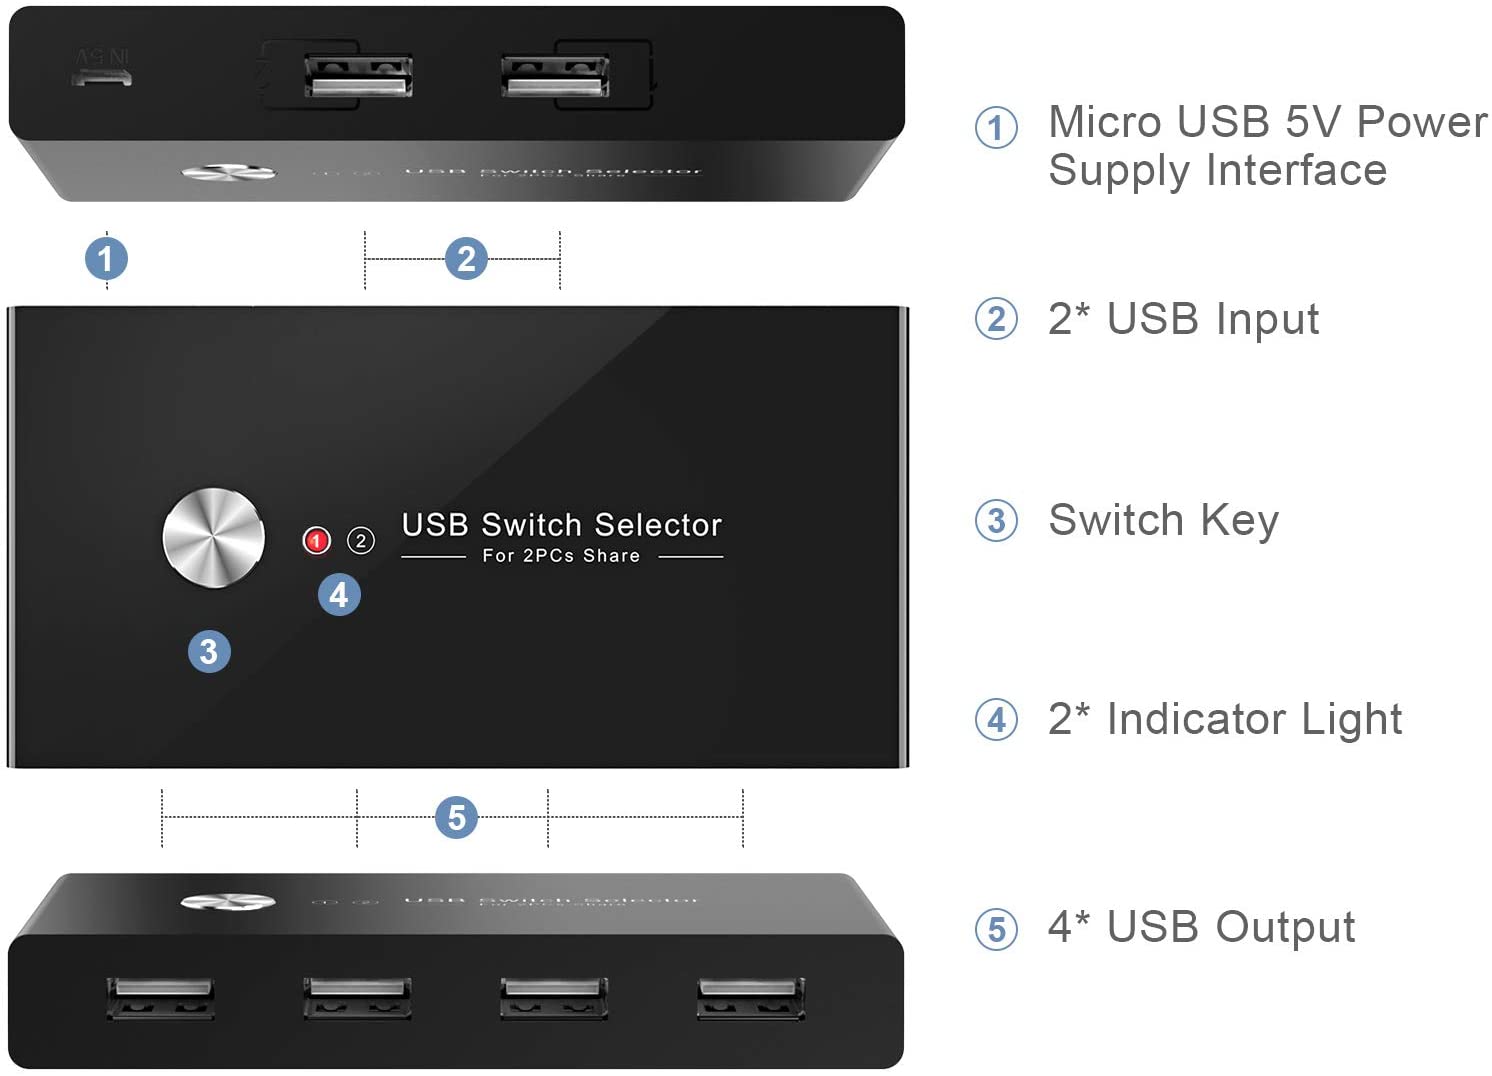 USB Switch Selector, USB 2.0 Switcher for 2 PC Sharing 4 USB Devices